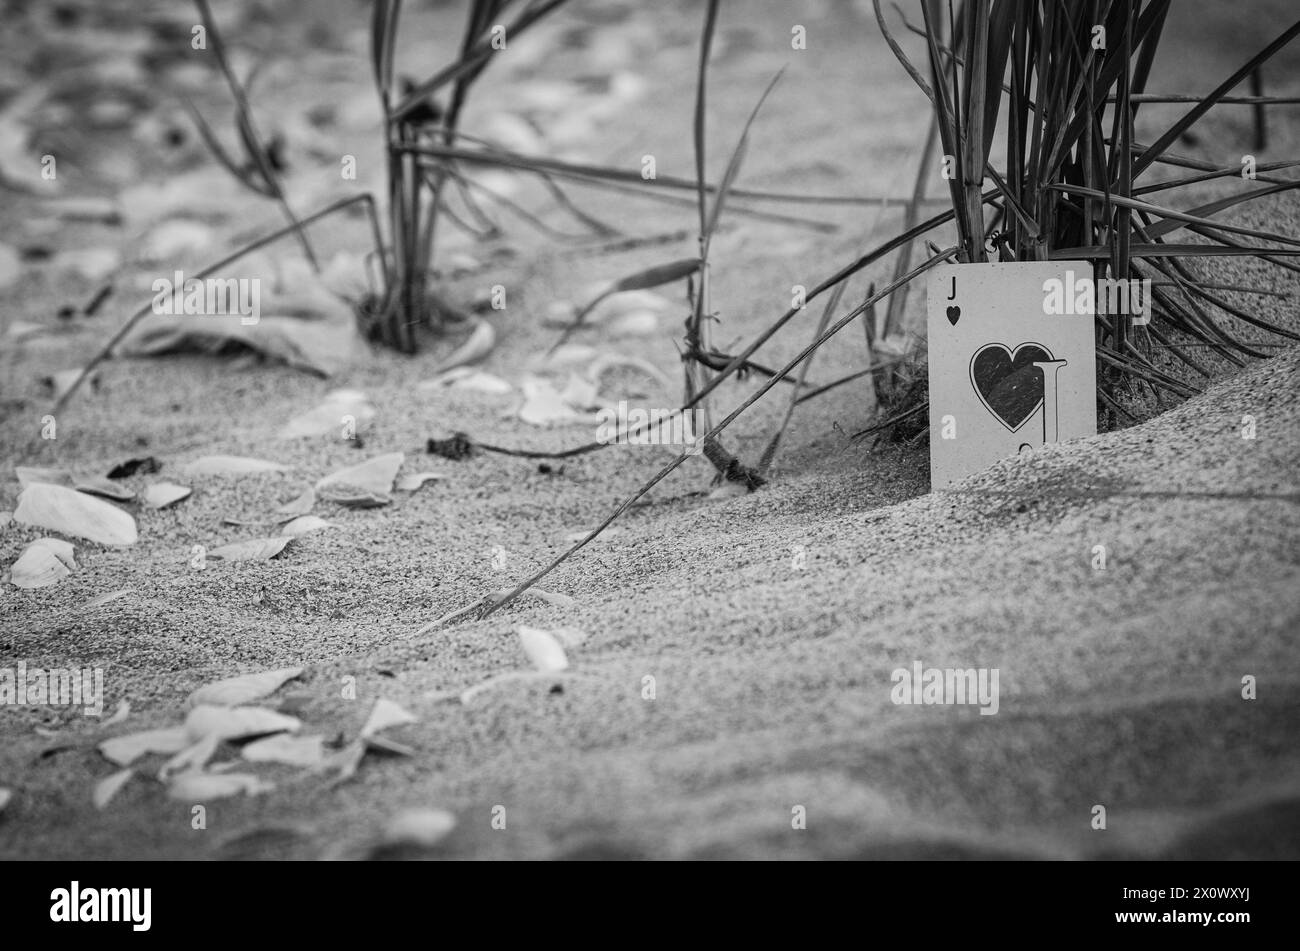 black and white, deck of cards blown by the wind on a beach, suggests bad luck of a gambler Stock Photo